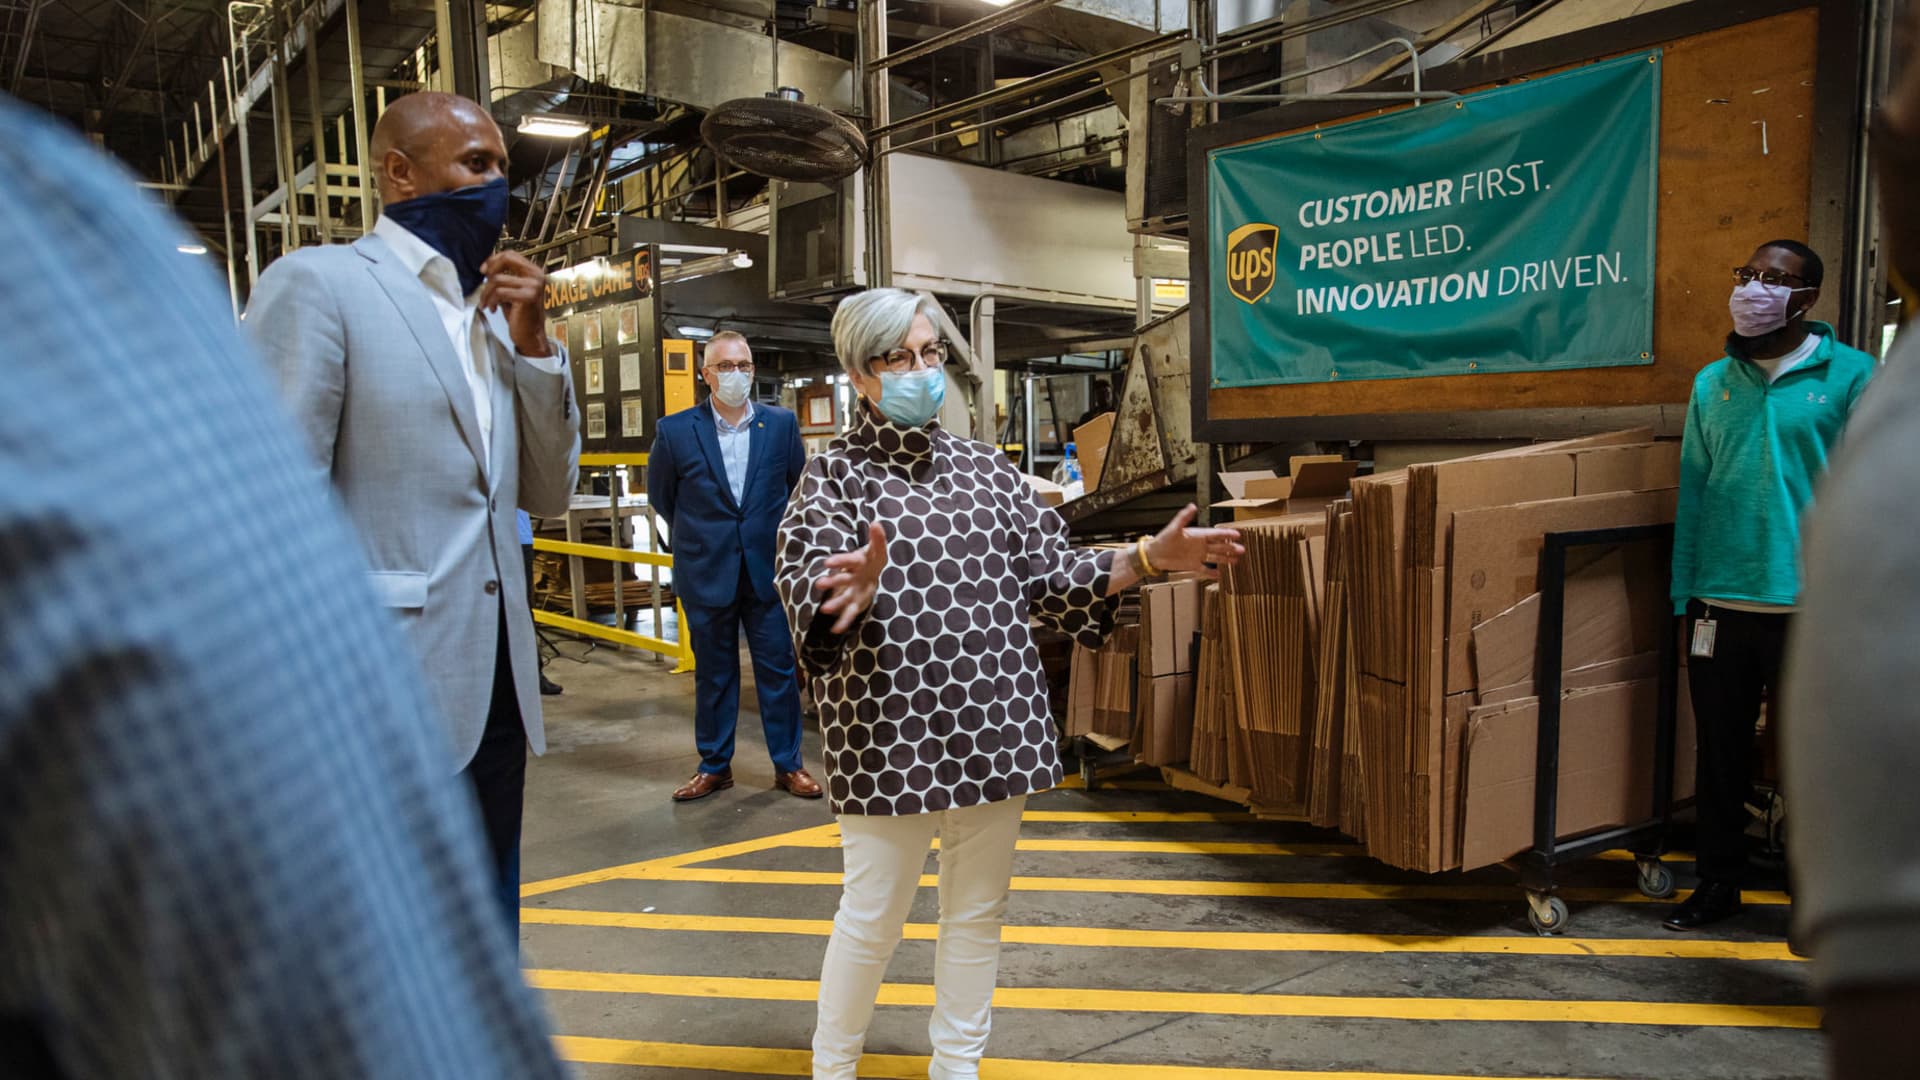 UPS CEO Carol Tome meets with workers